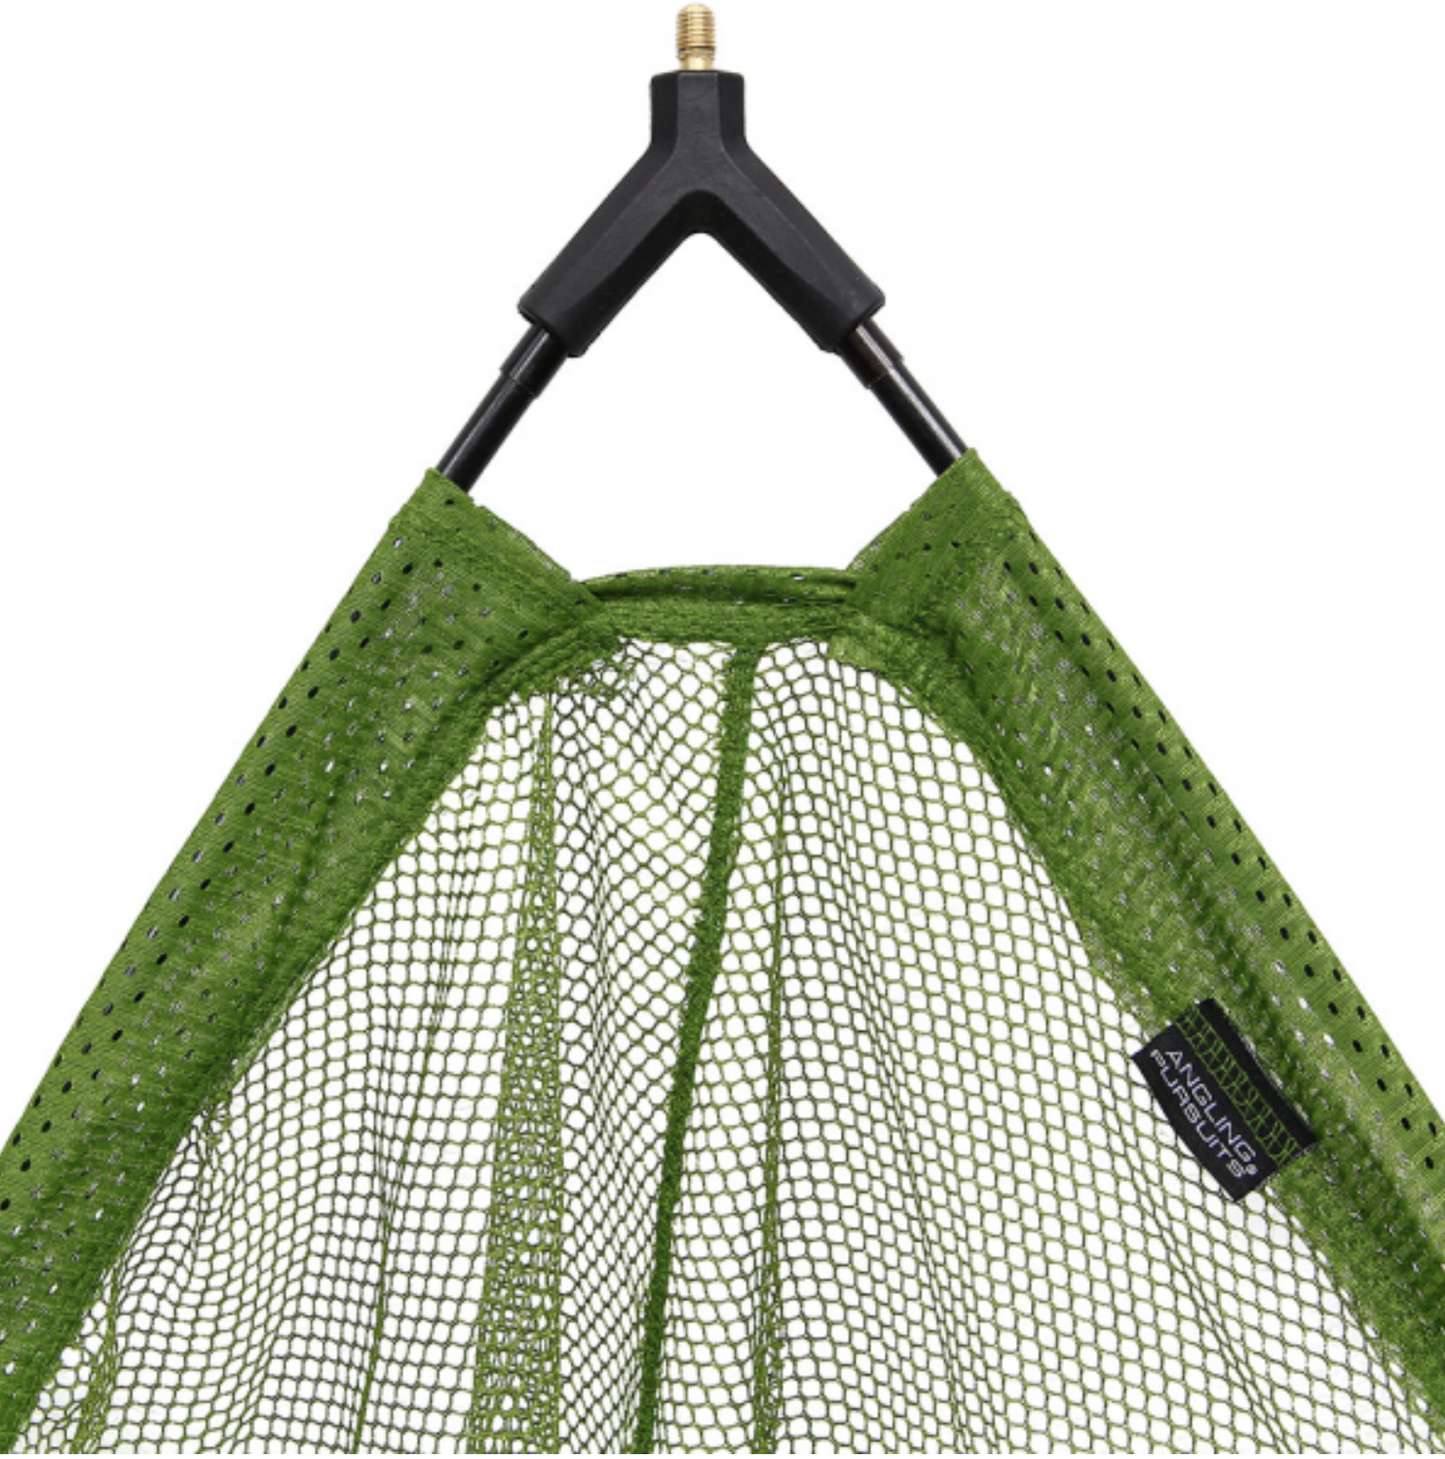 A triangular 42 inch specialist net and 2pc combo, 1.8m telescopic handle.